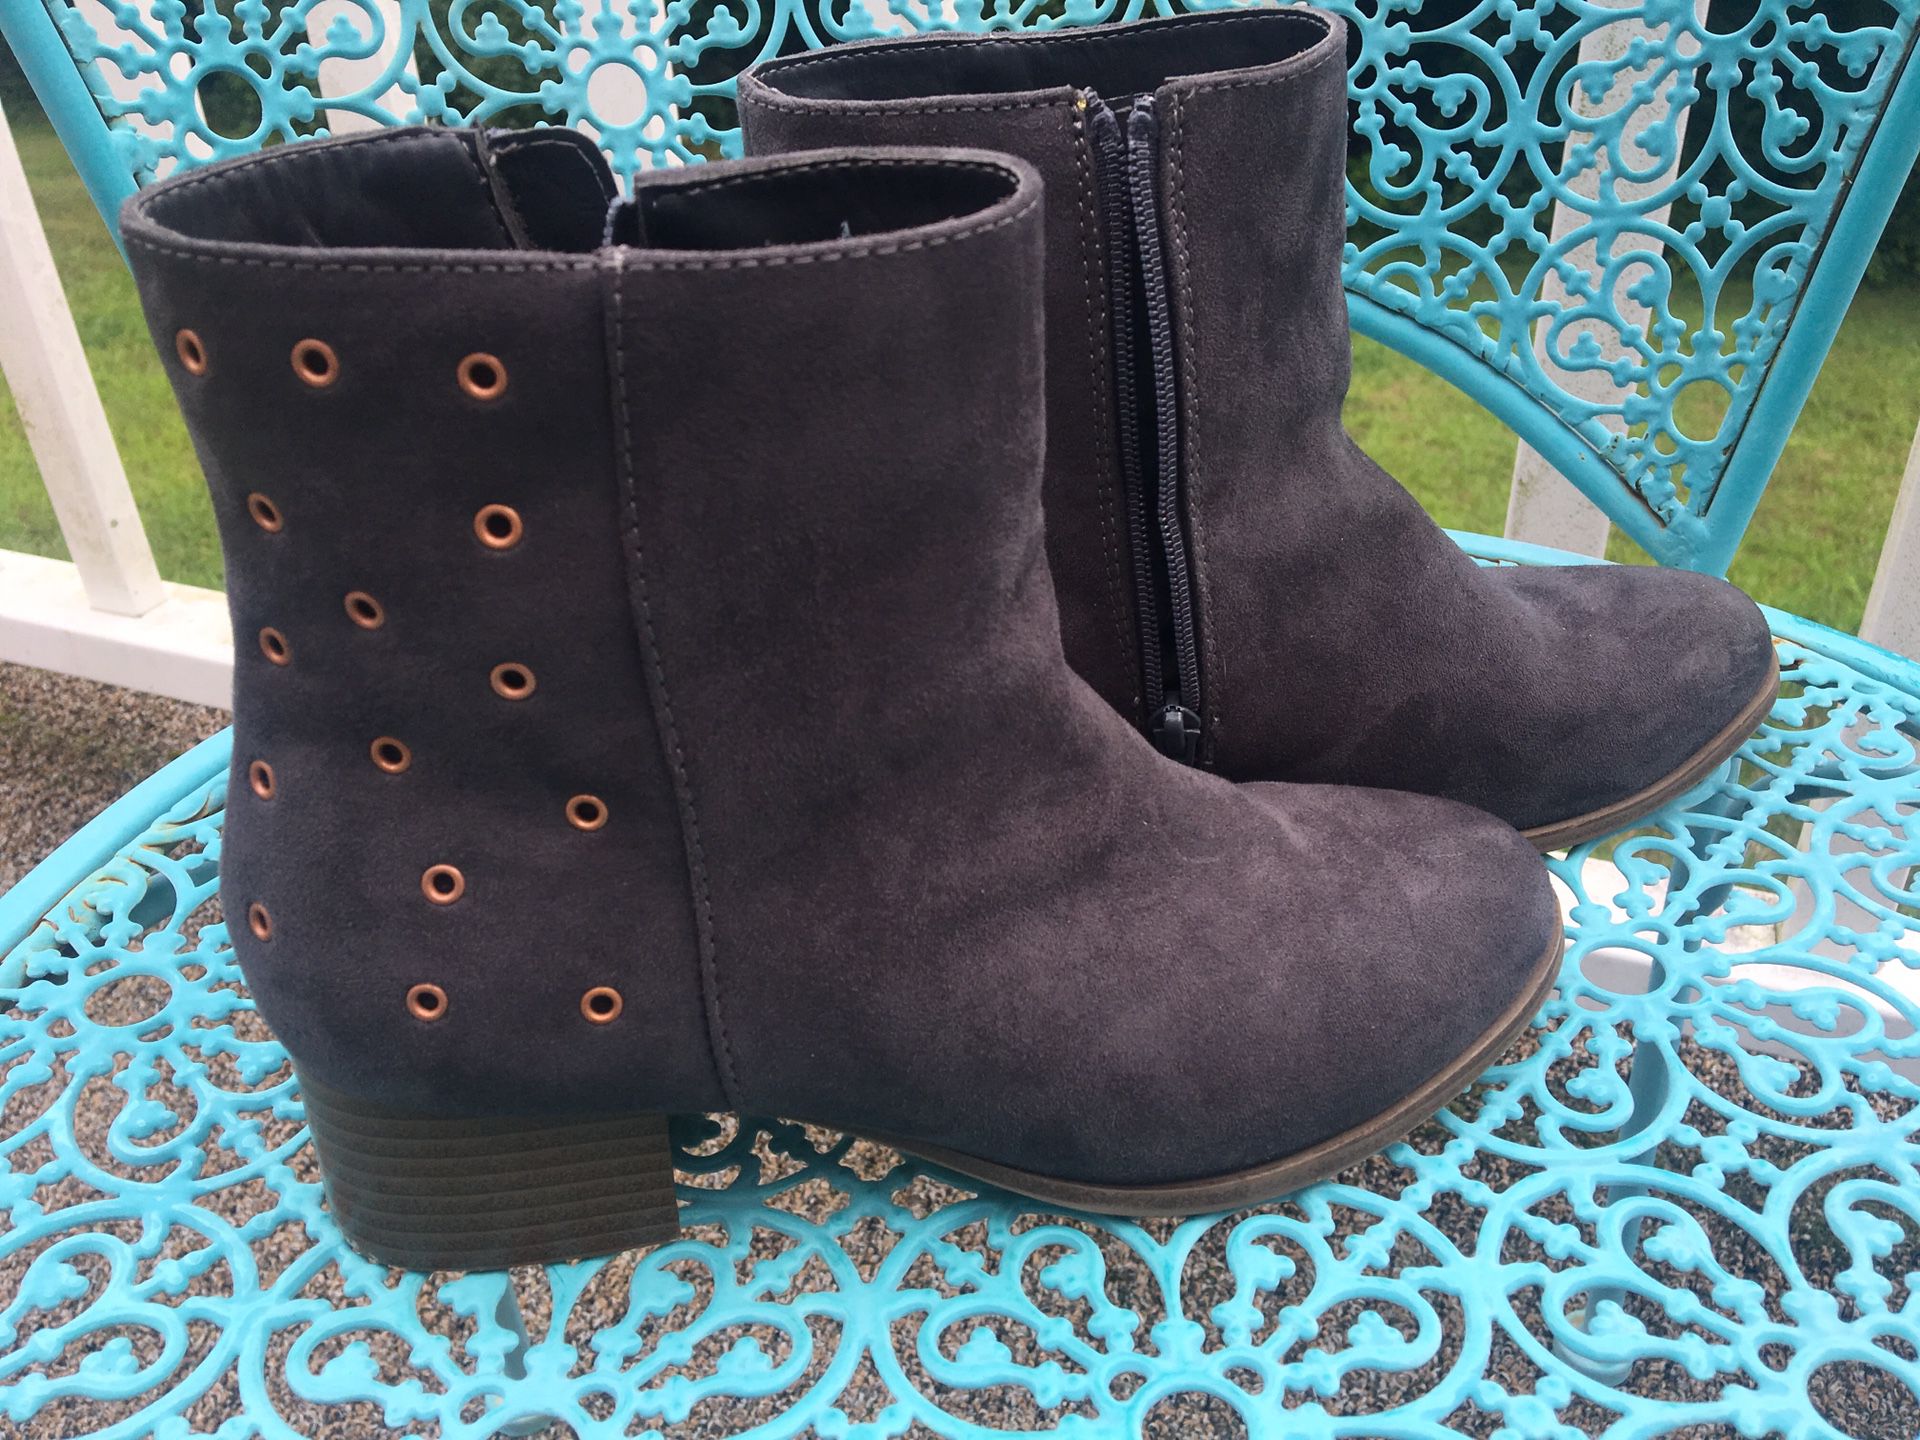 Grey suede boots. Girls size 5